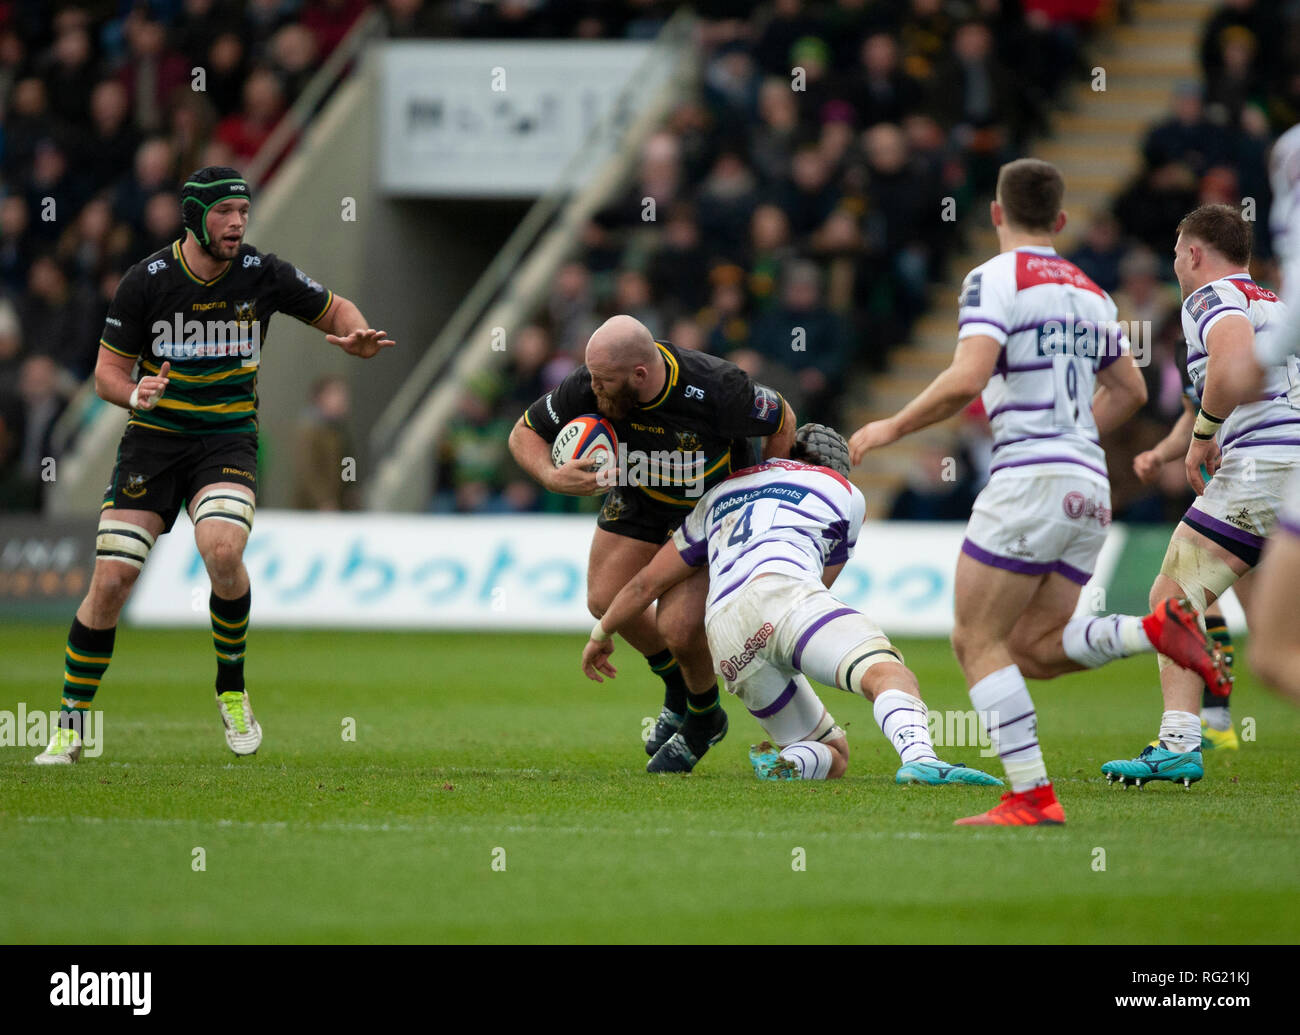 Northampton, UK. 26th January 2019. Ben Franks of Northampton Saints runs with the ball during the Premiership Rugby Cup match between Northampton Saints and Leicester Tigers. Andrew Taylor/Alamy Live News Stock Photo